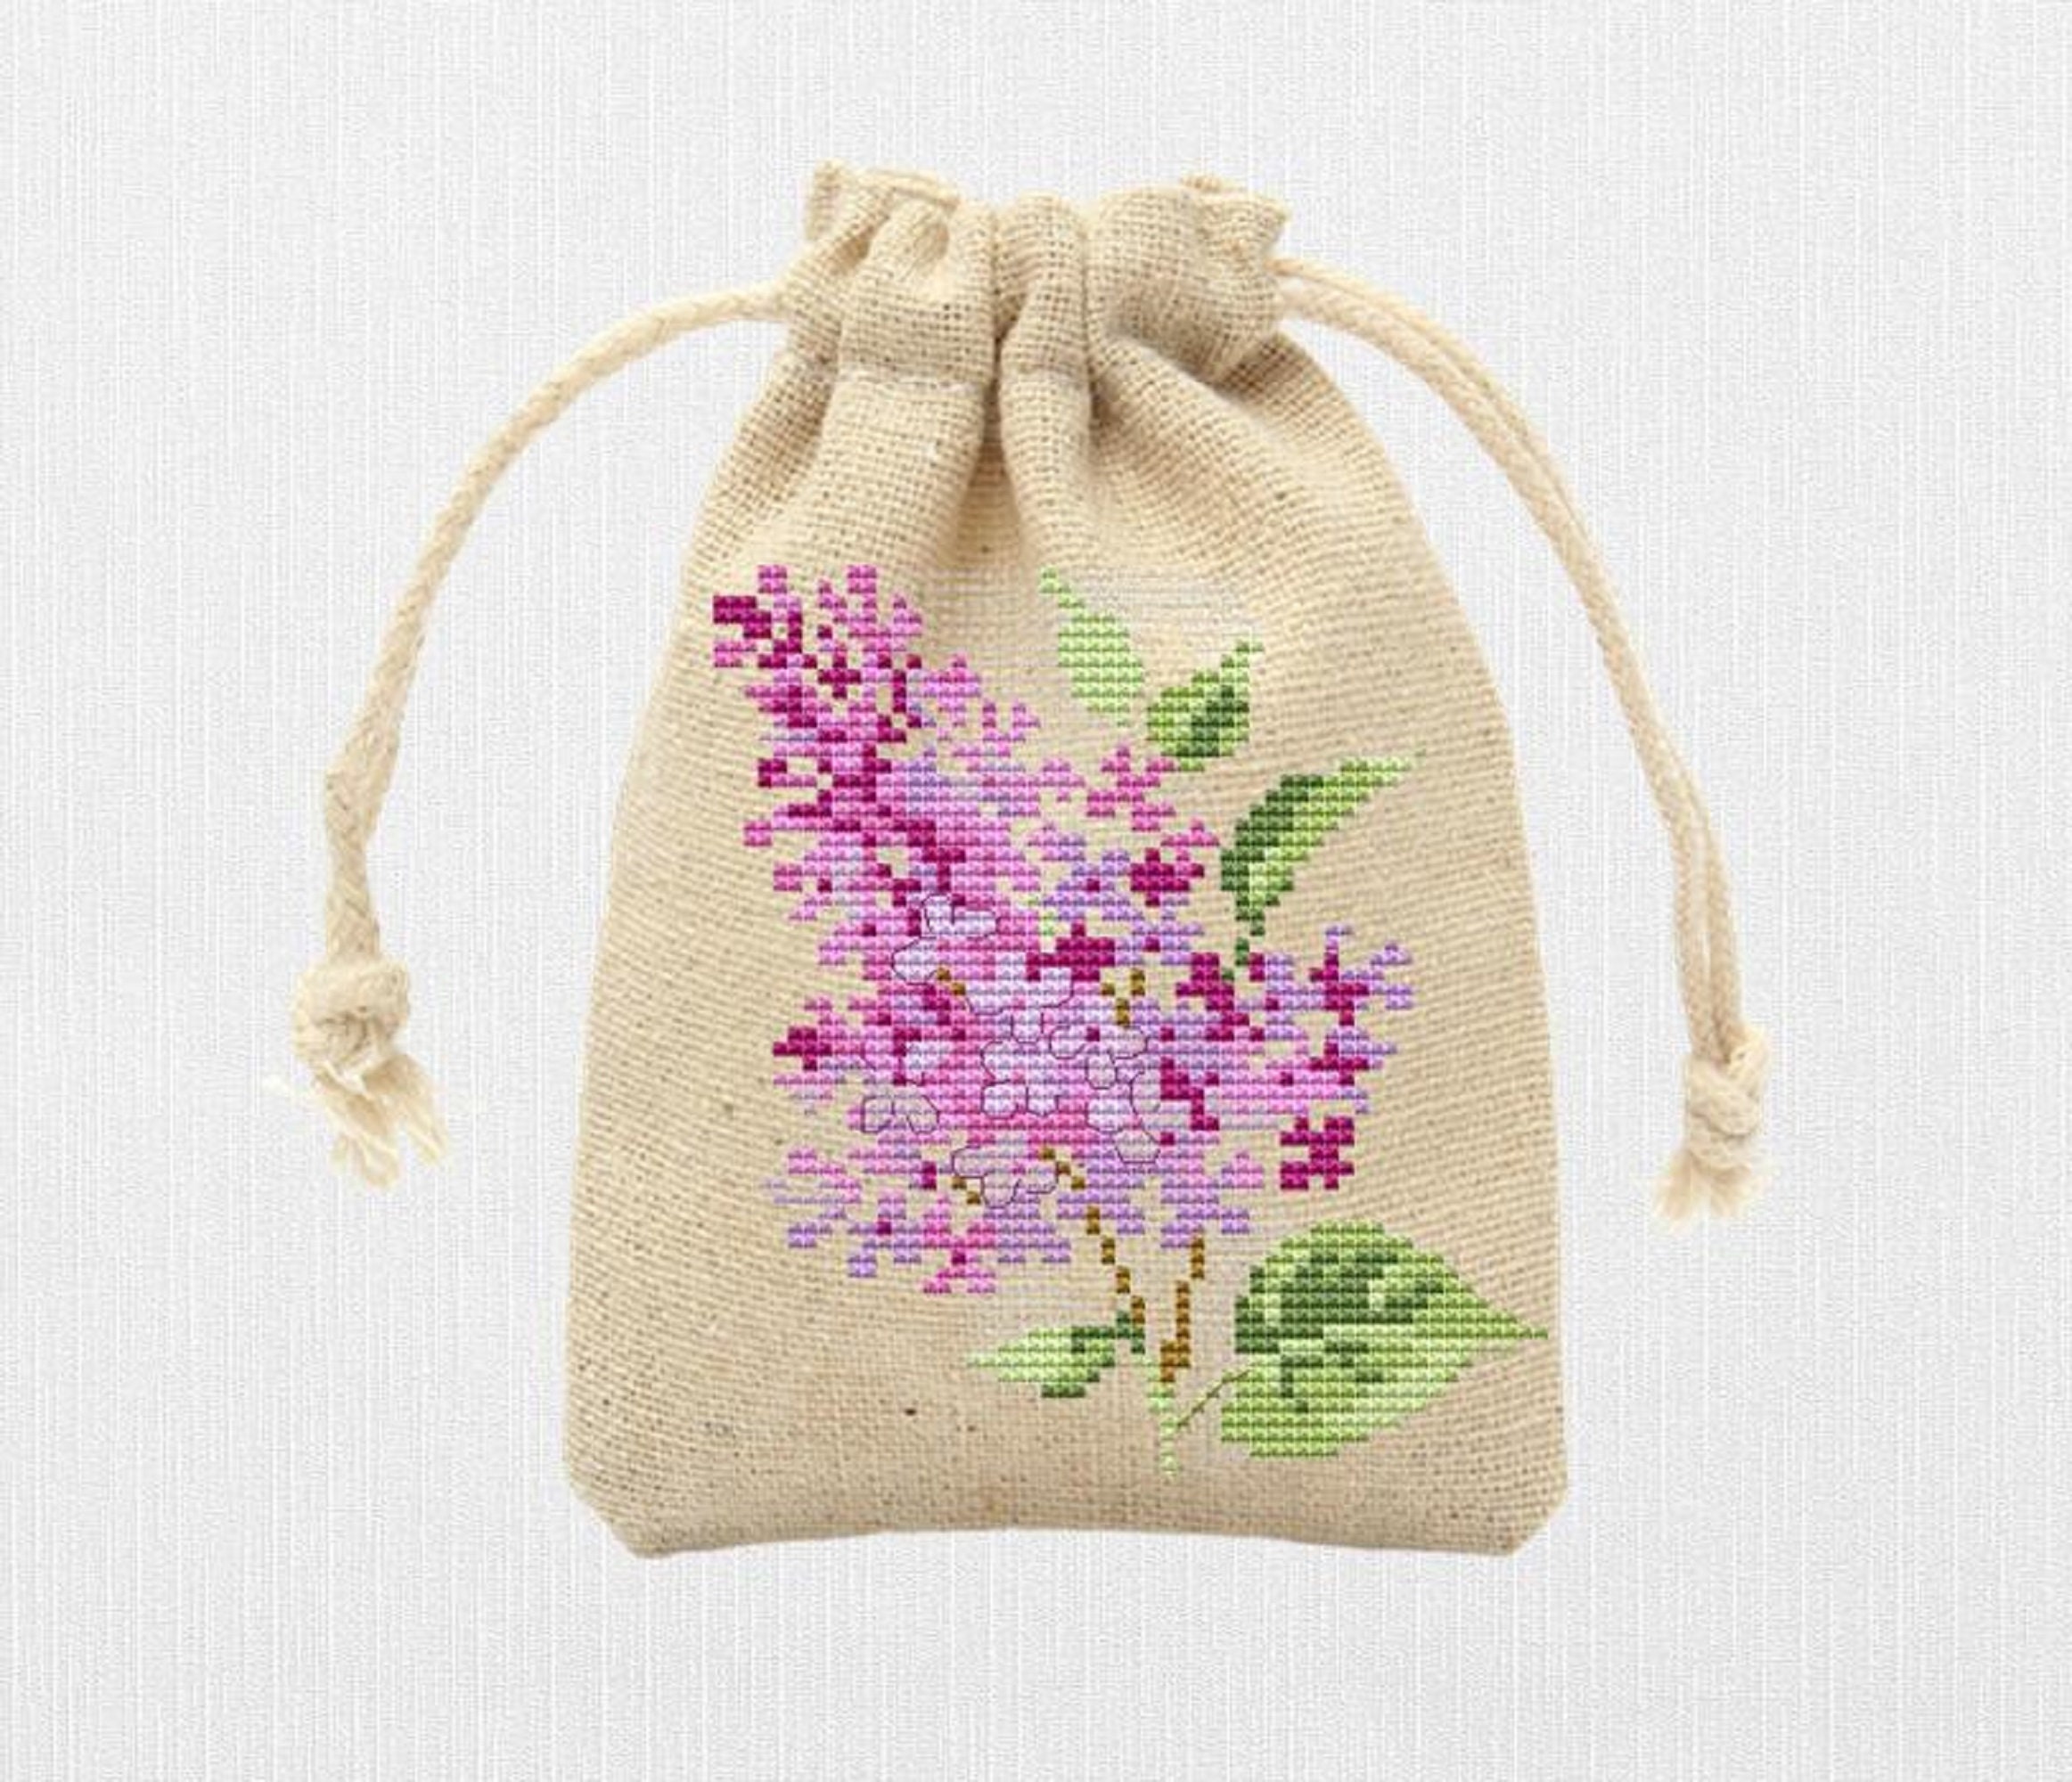 Awesocrafts Cross Stitch Kits Lilac Flowers 11CT Stamped Patterns Easy Cross Stitching Embroidery Needlework Kit Supplies (Lilac Flowers)